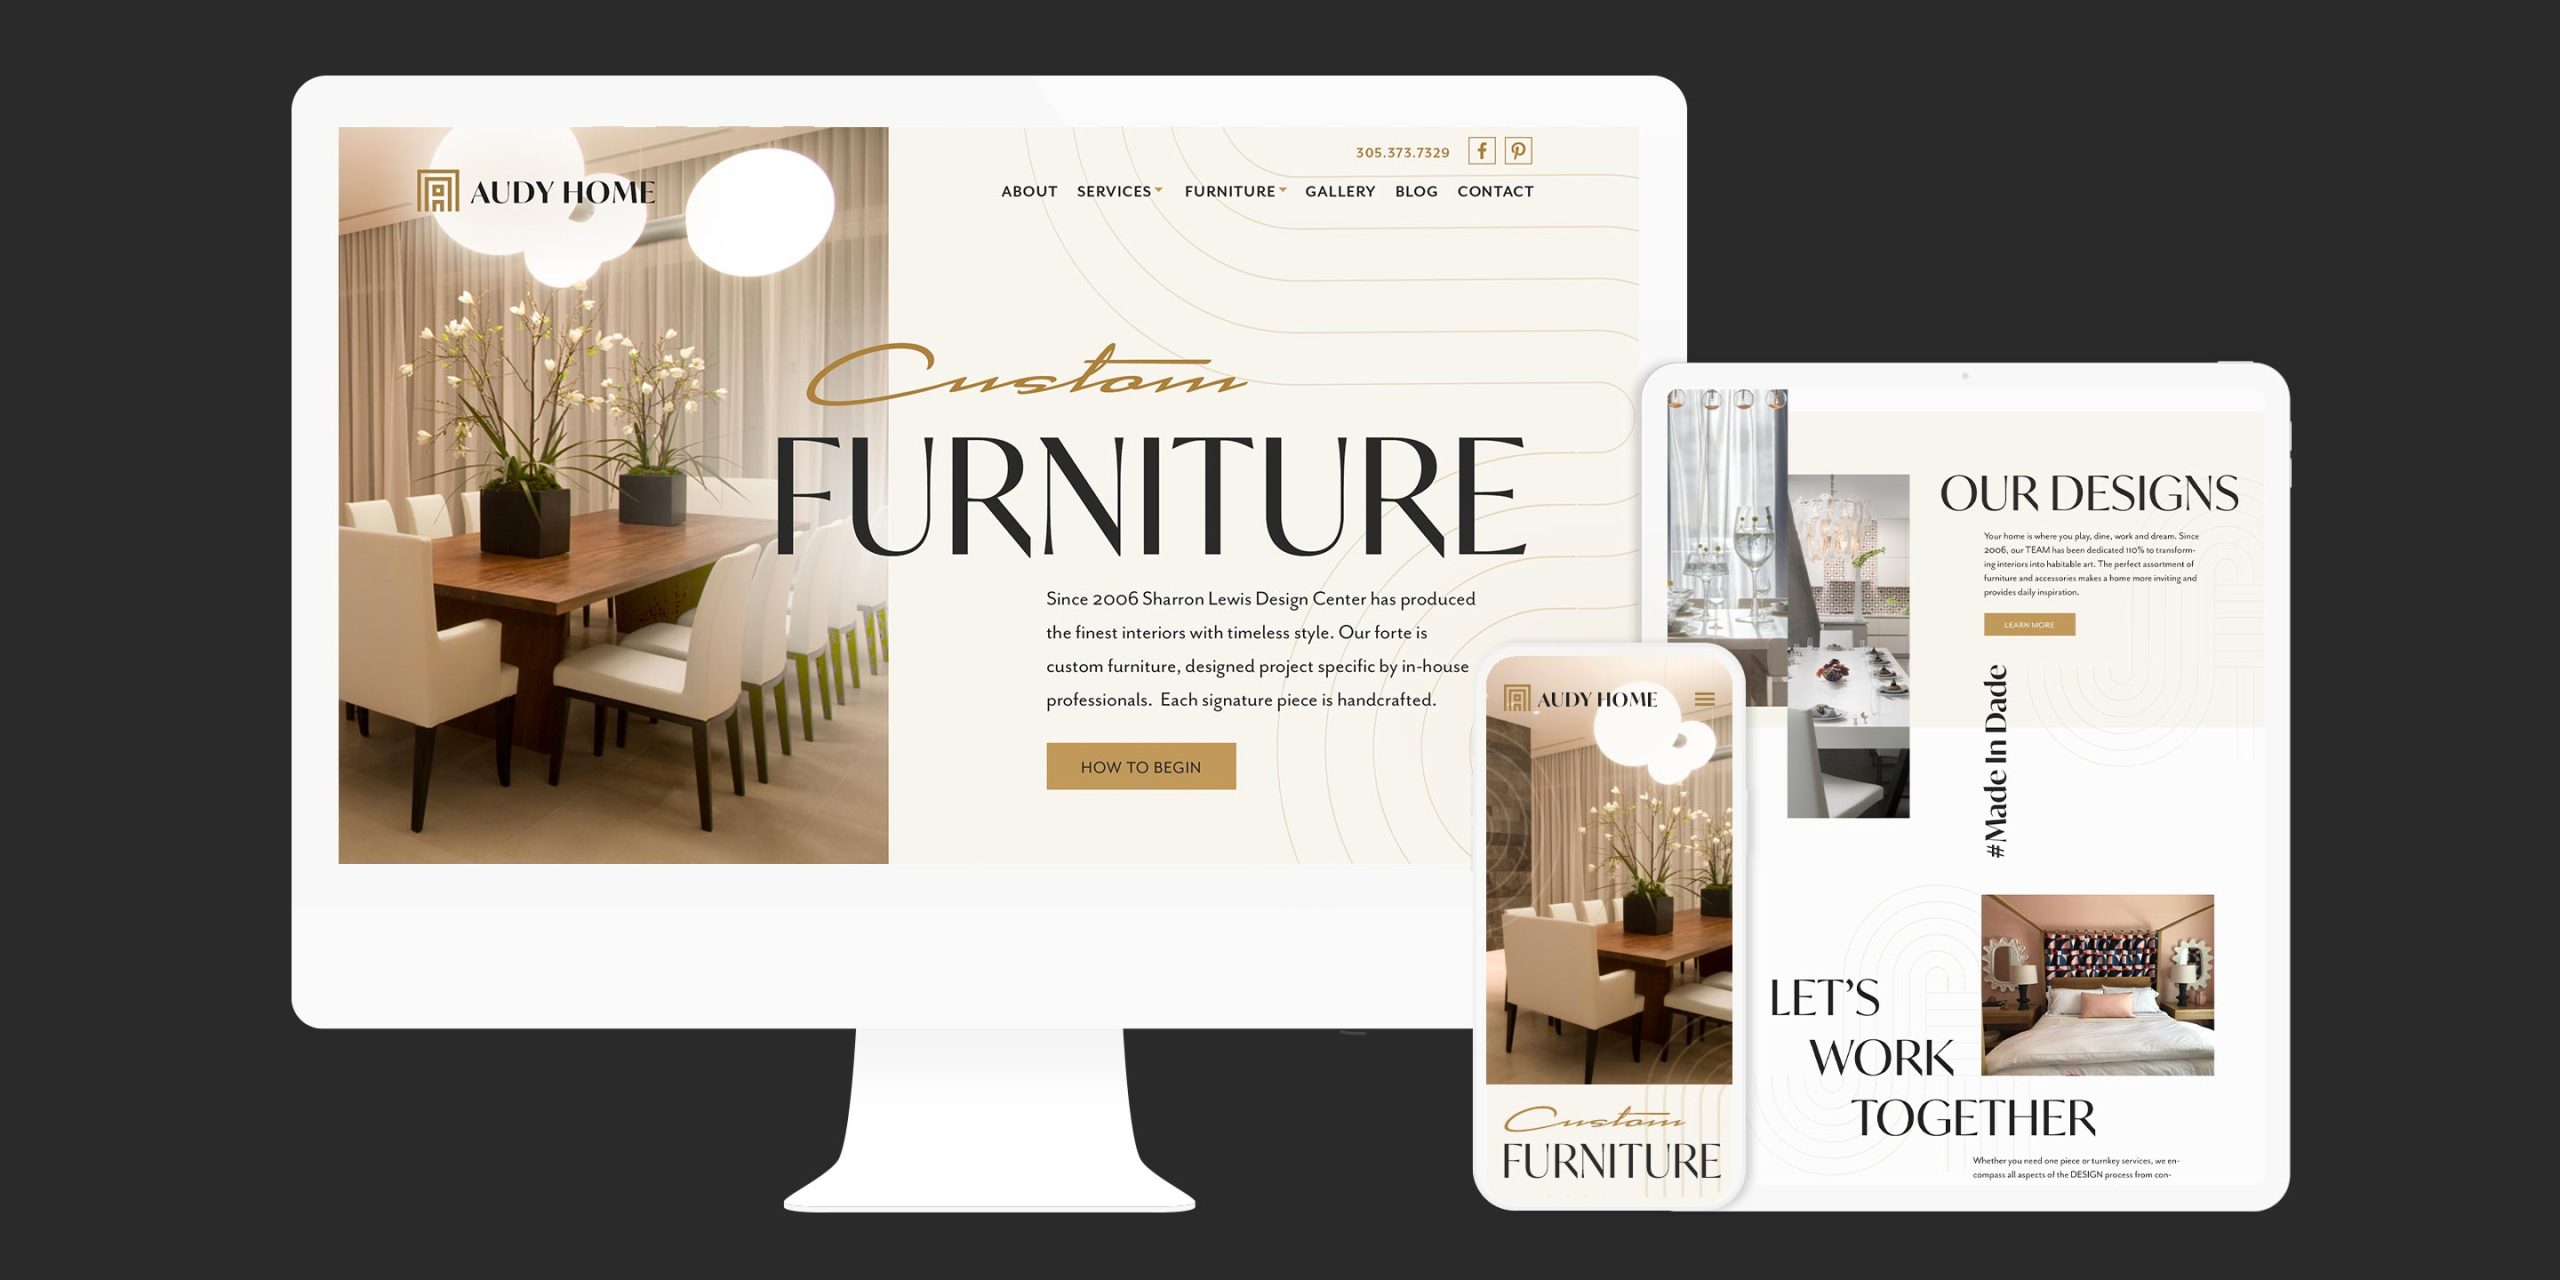 Audy Home website design responsively displayed on multiple devices